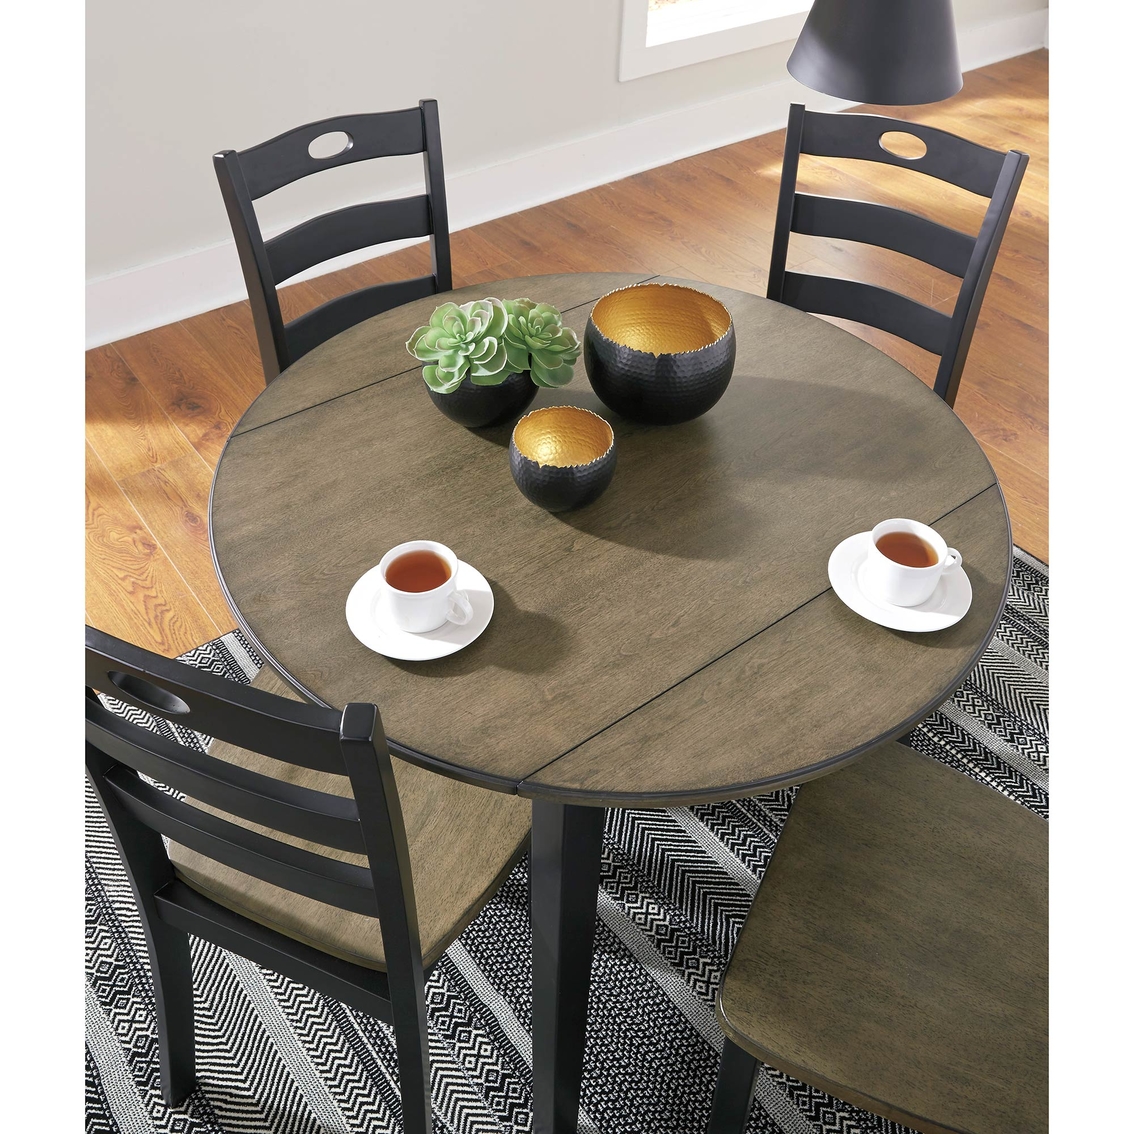 Signature Design by Ashley Froshburg Round Drop Leaf Dining Table - Image 3 of 3